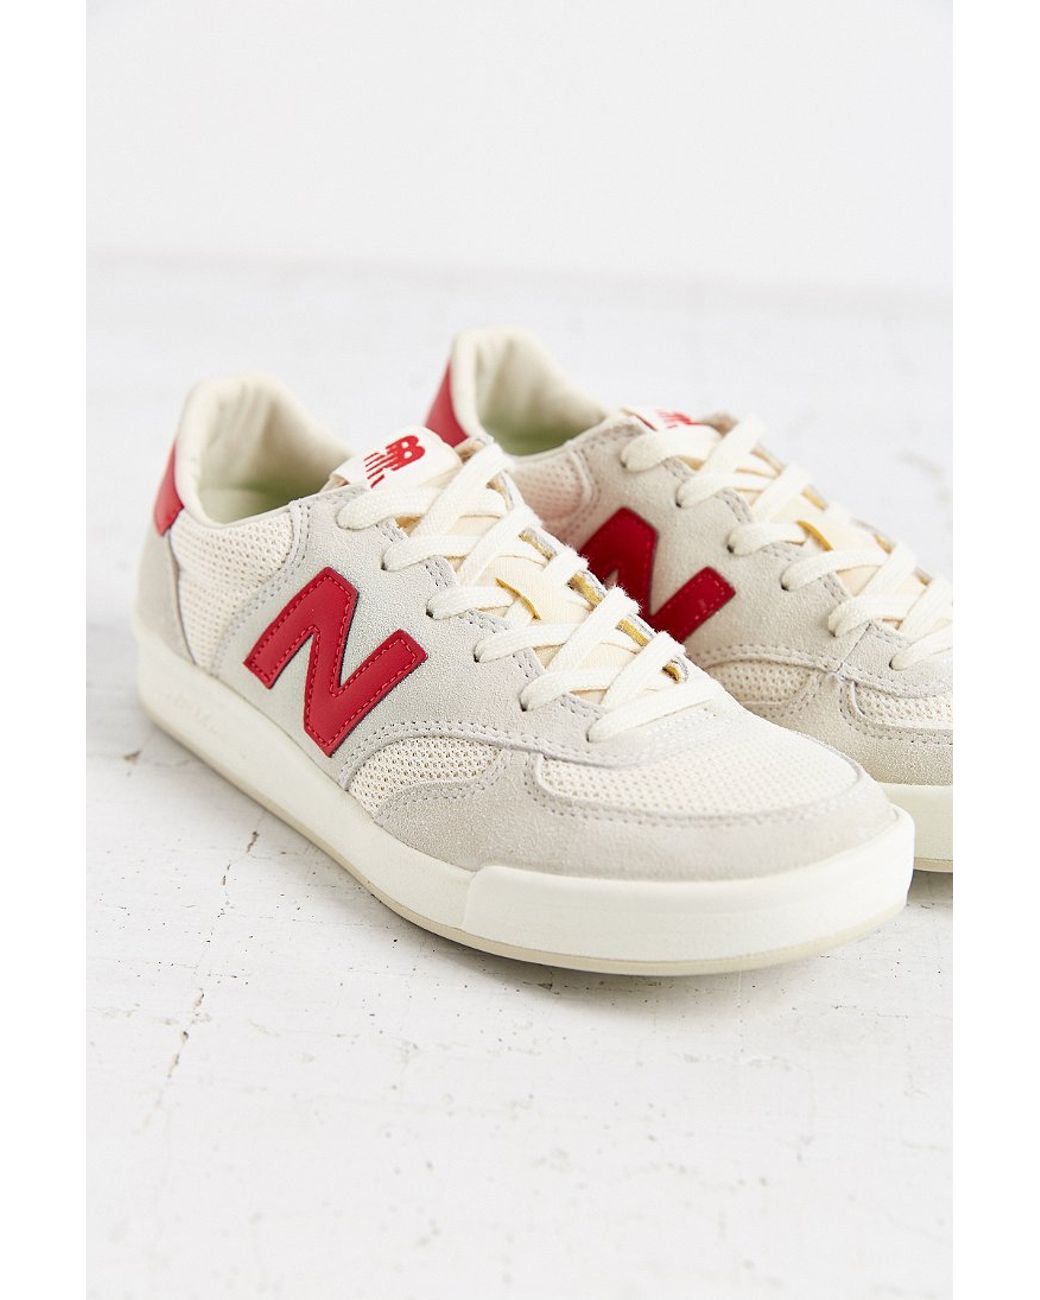 New Balance Crt300 Court Sneaker in Red | Lyst